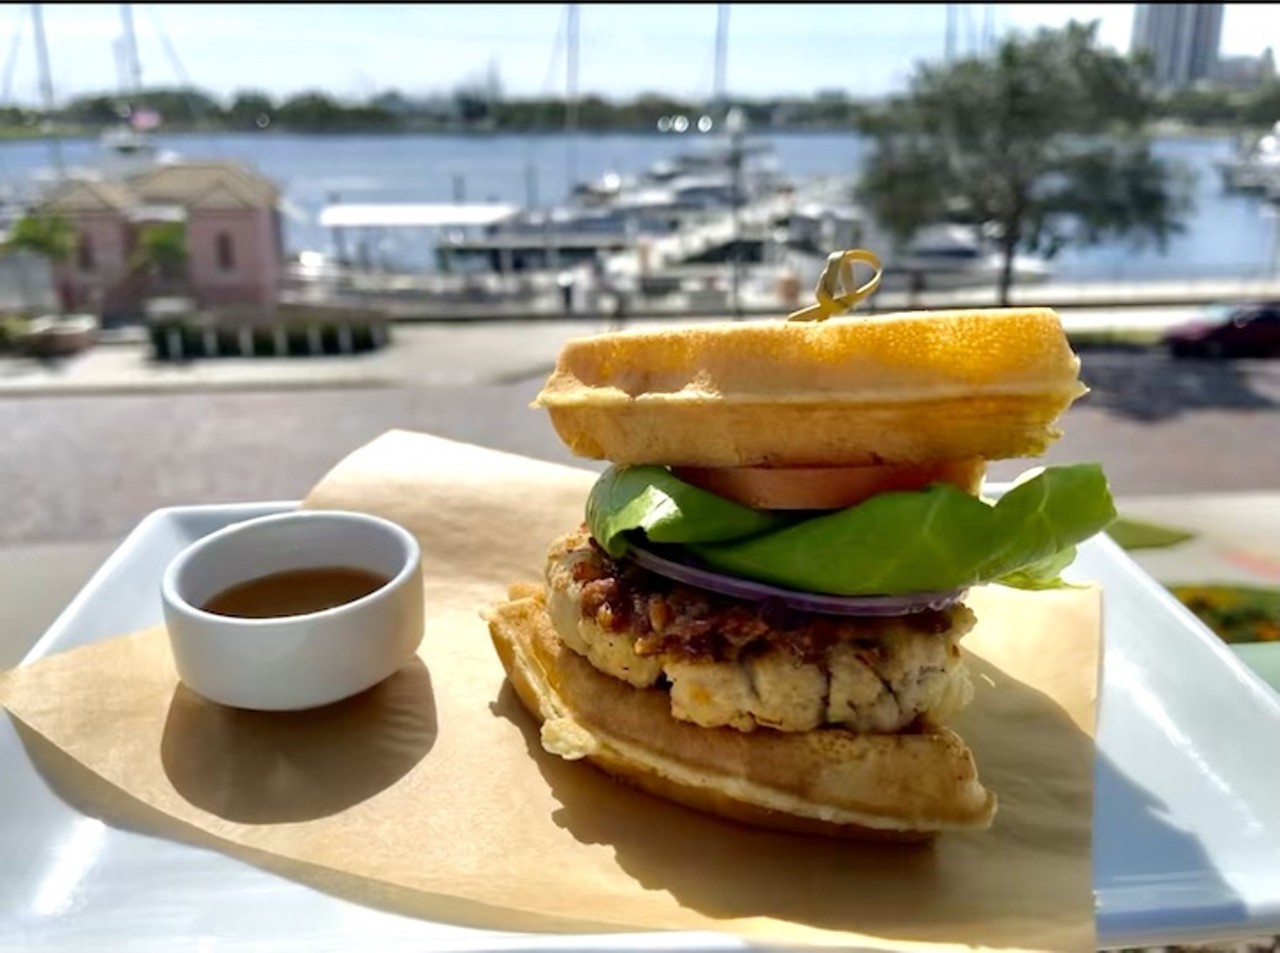 Paul's Landing
501 5th Ave. N.E., St. Petersburg
(727) 824-8007
paulslandingstpete.com
Chicken and Waffle Burger - $10
Served with candied bacon jam, bibb lettuce, tomato and red onion and maple-bourbon glaze (Add a side of fries or sweet potato tots for only $5!)
Ask about adding a Funky Buddha beer!
Ask about adding a Tito&#146;s Handmade Vodka cocktail!
Takeout (call-in), Dine-in